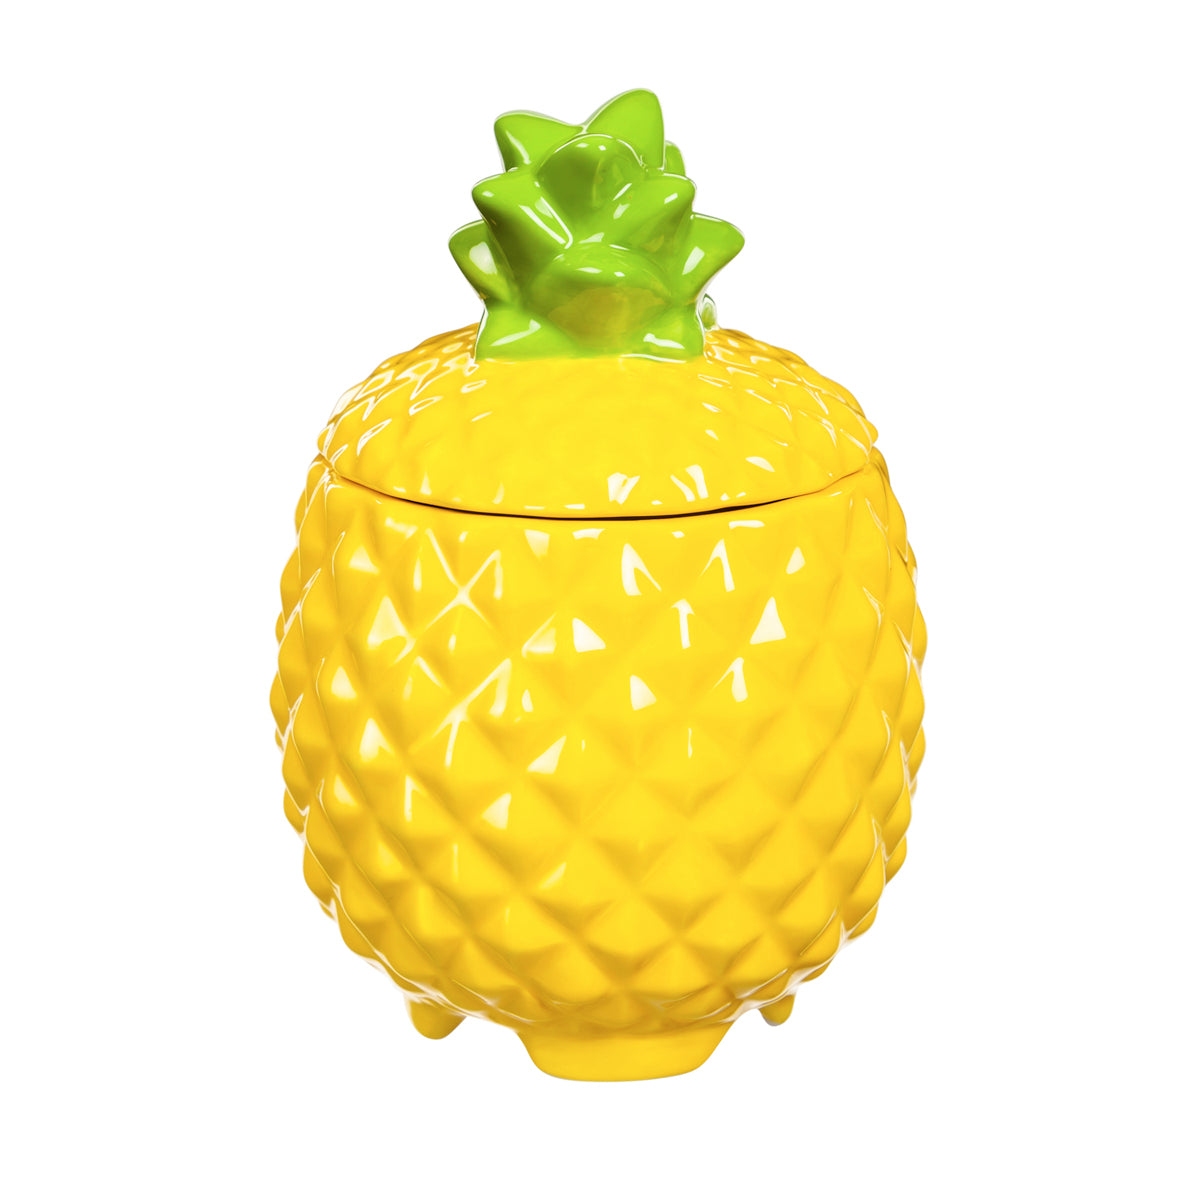 Refillable Ceramic Fruit Fly Trap, Pineapple